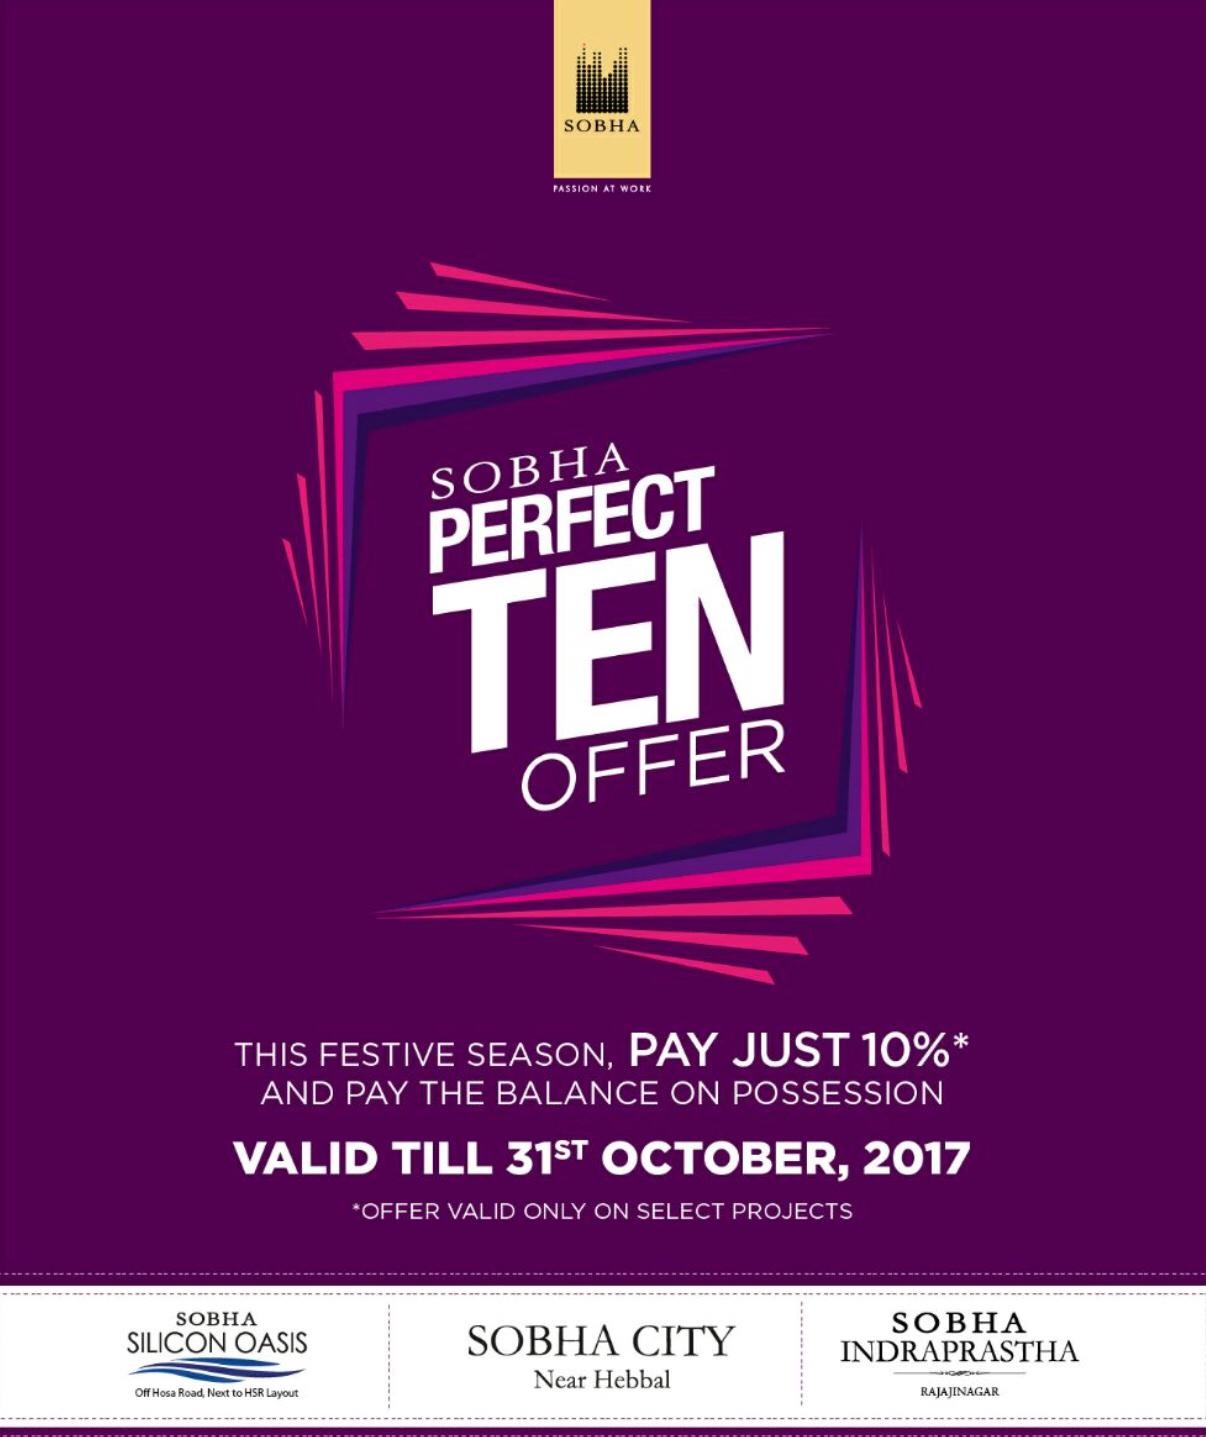 Sobha perfect teen offer during this festive season in Bangalore